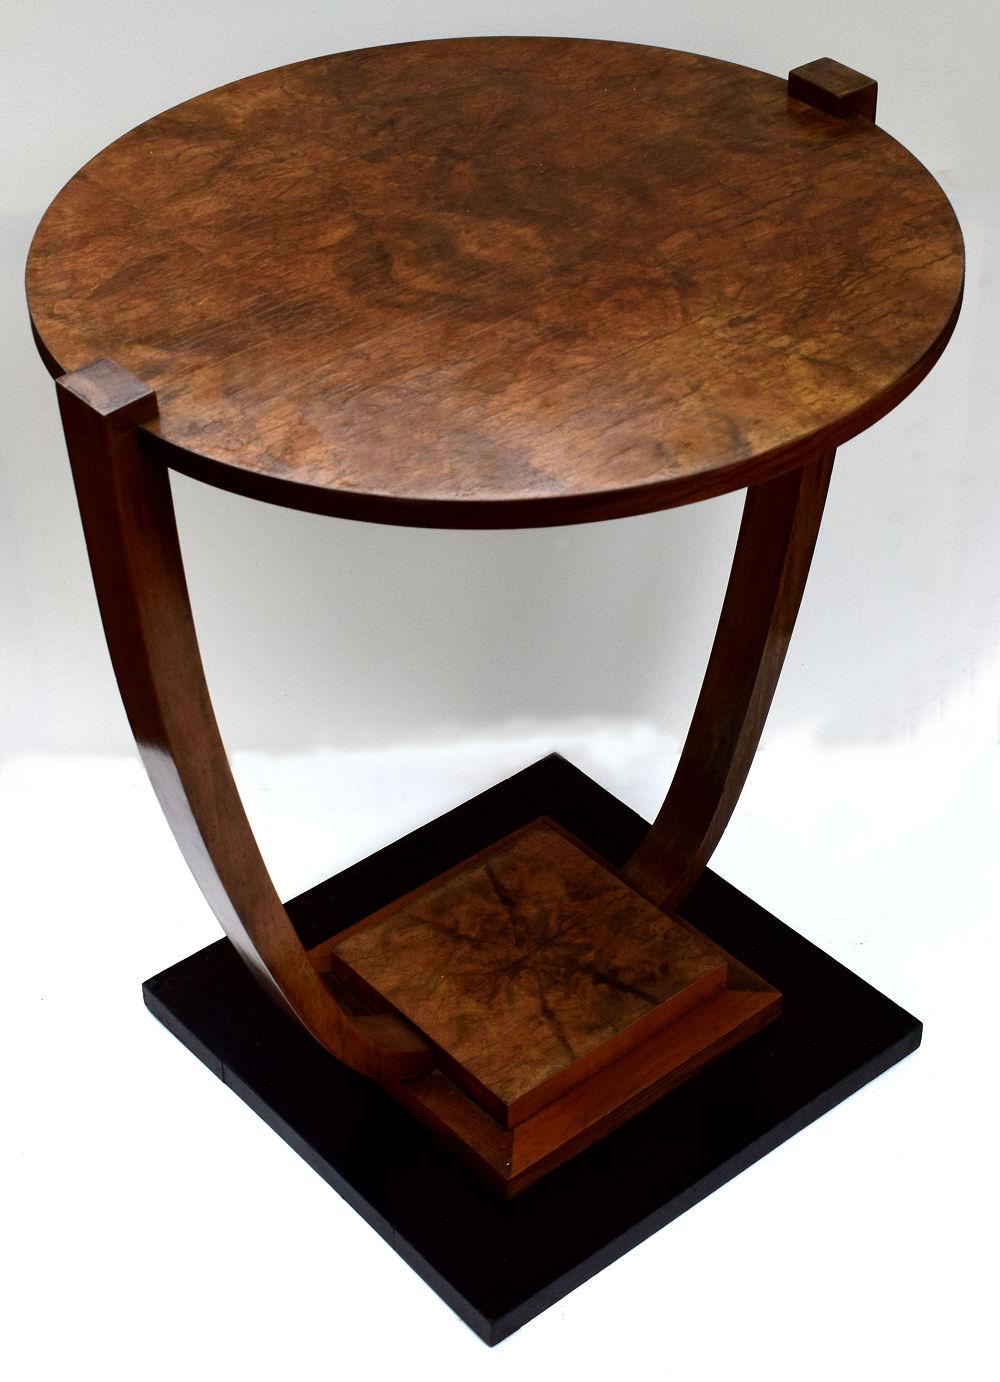 A very stylish 1930s Art Deco French occasional table very much in the style of Leleu. Beautiful walnut veneers and two-tiered with an ebonized stepped base. Typically French in style and would make a great focal point to any room, looks great from